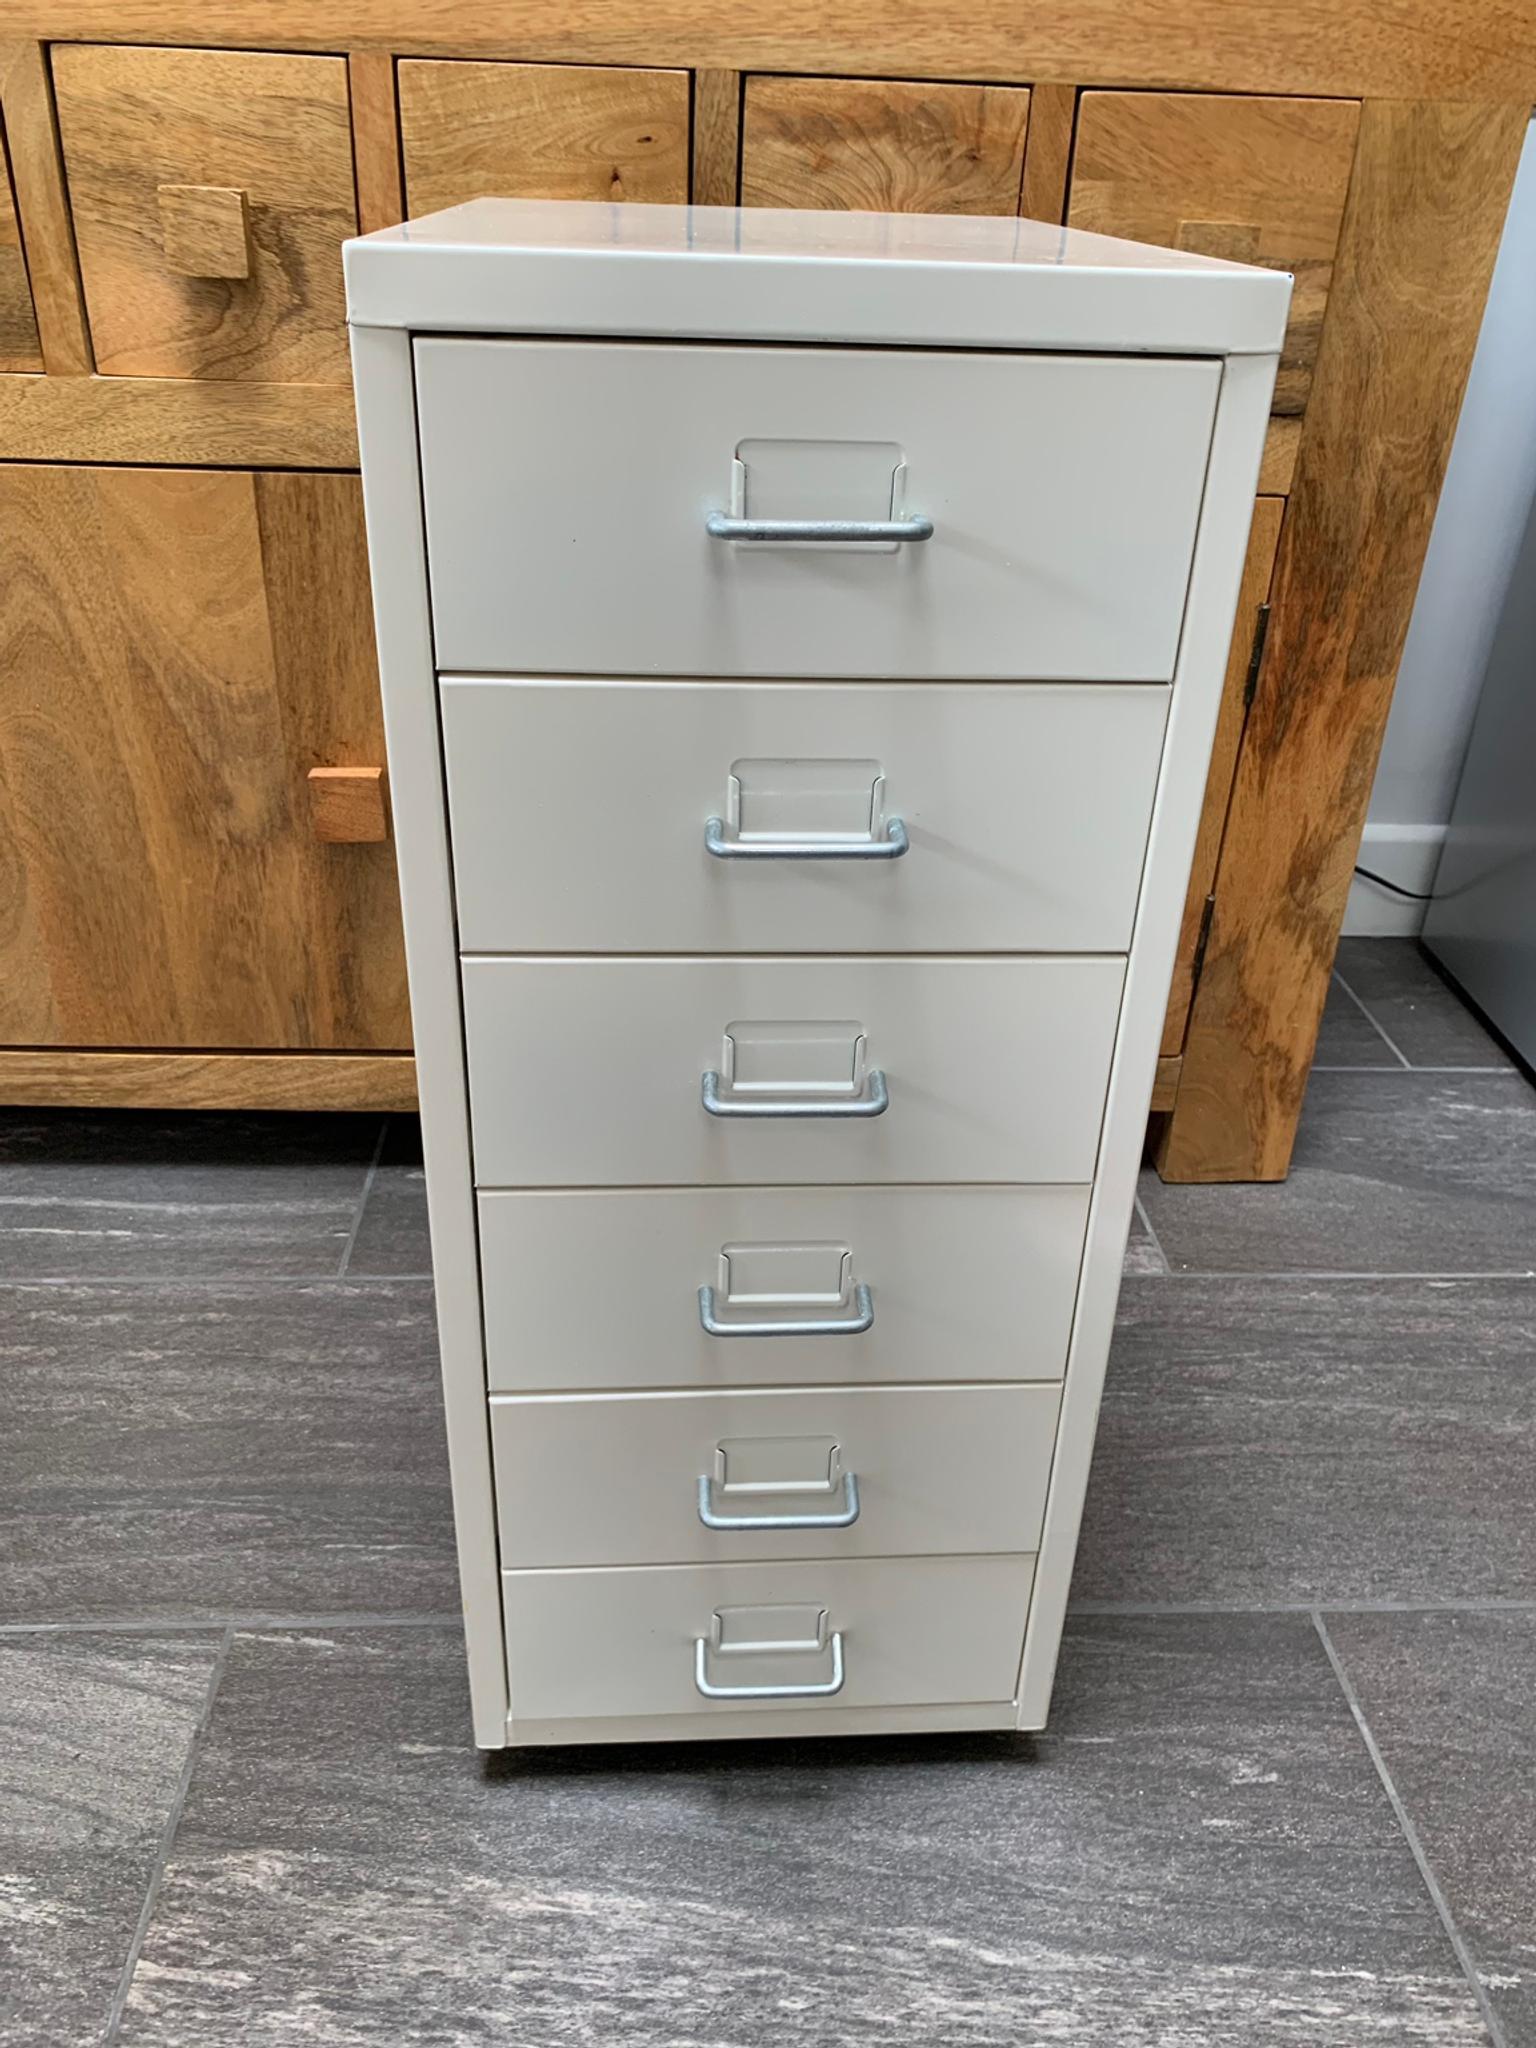 Metal Drawer Filing Cabinet In London Borough Of Sutton For 24 00